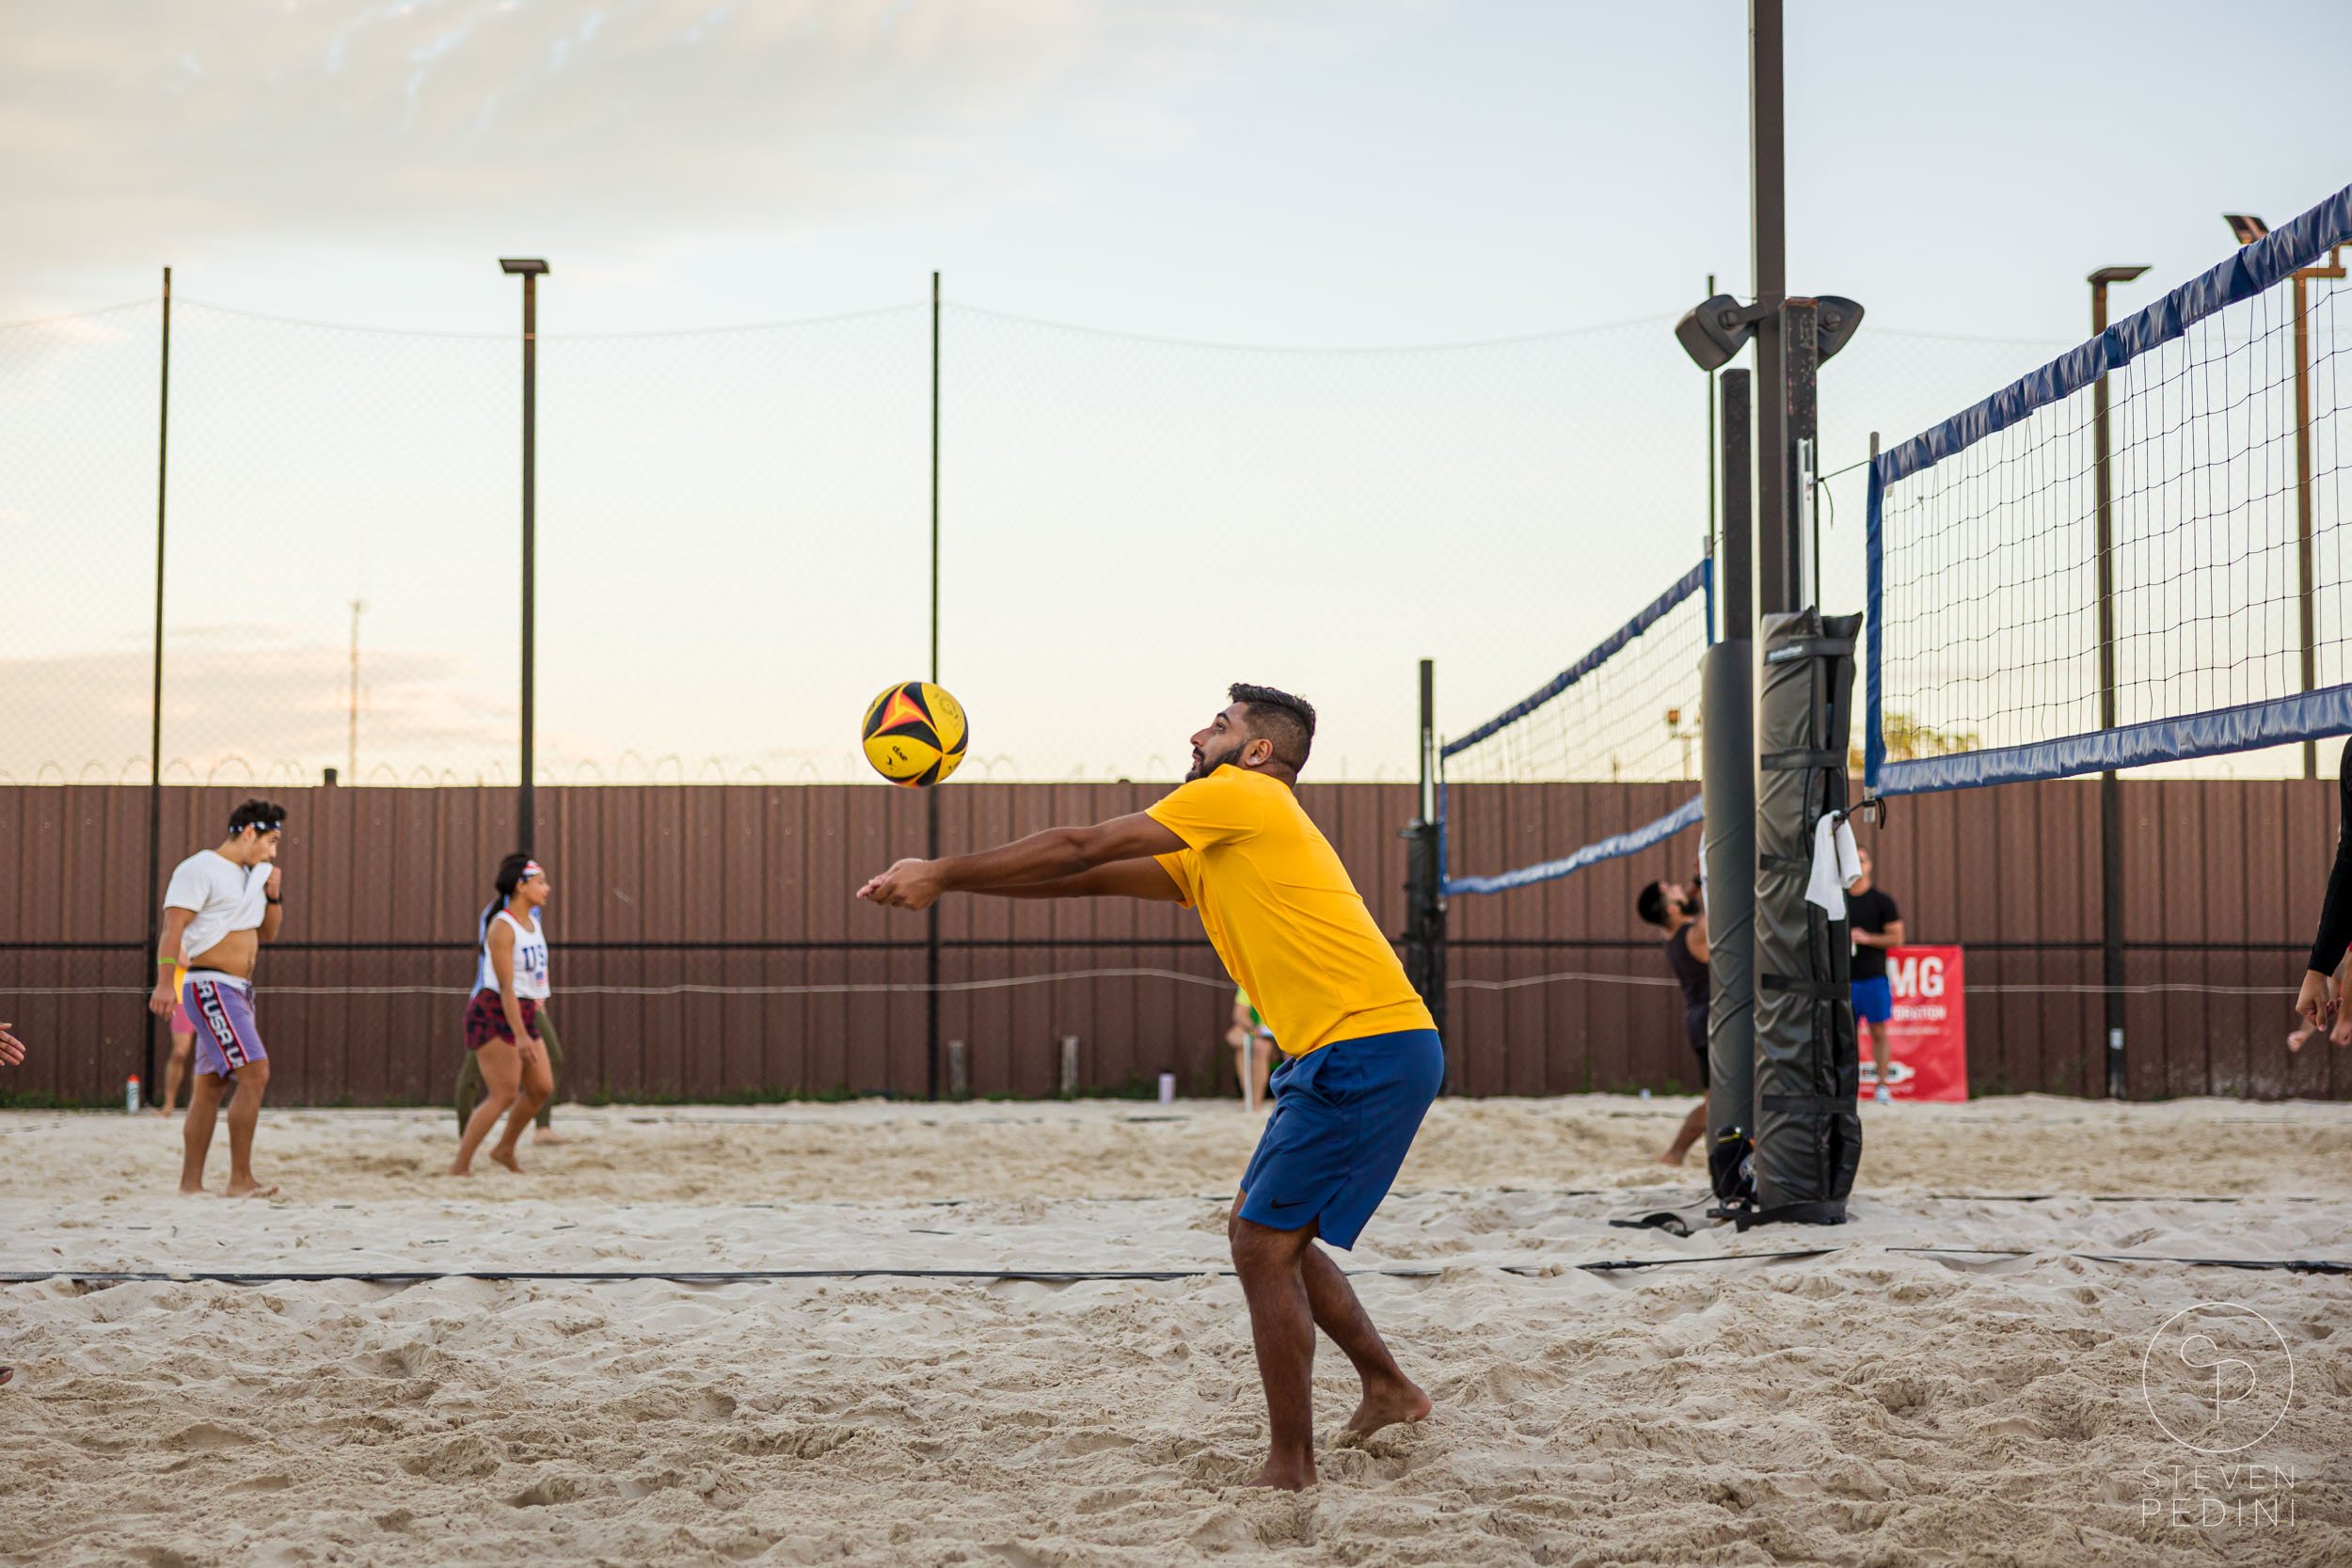 Steven Pedini Photography - Bumpy Pickle - Sand Volleyball - Houston TX - World Cup of Volleyball - 00223.jpg